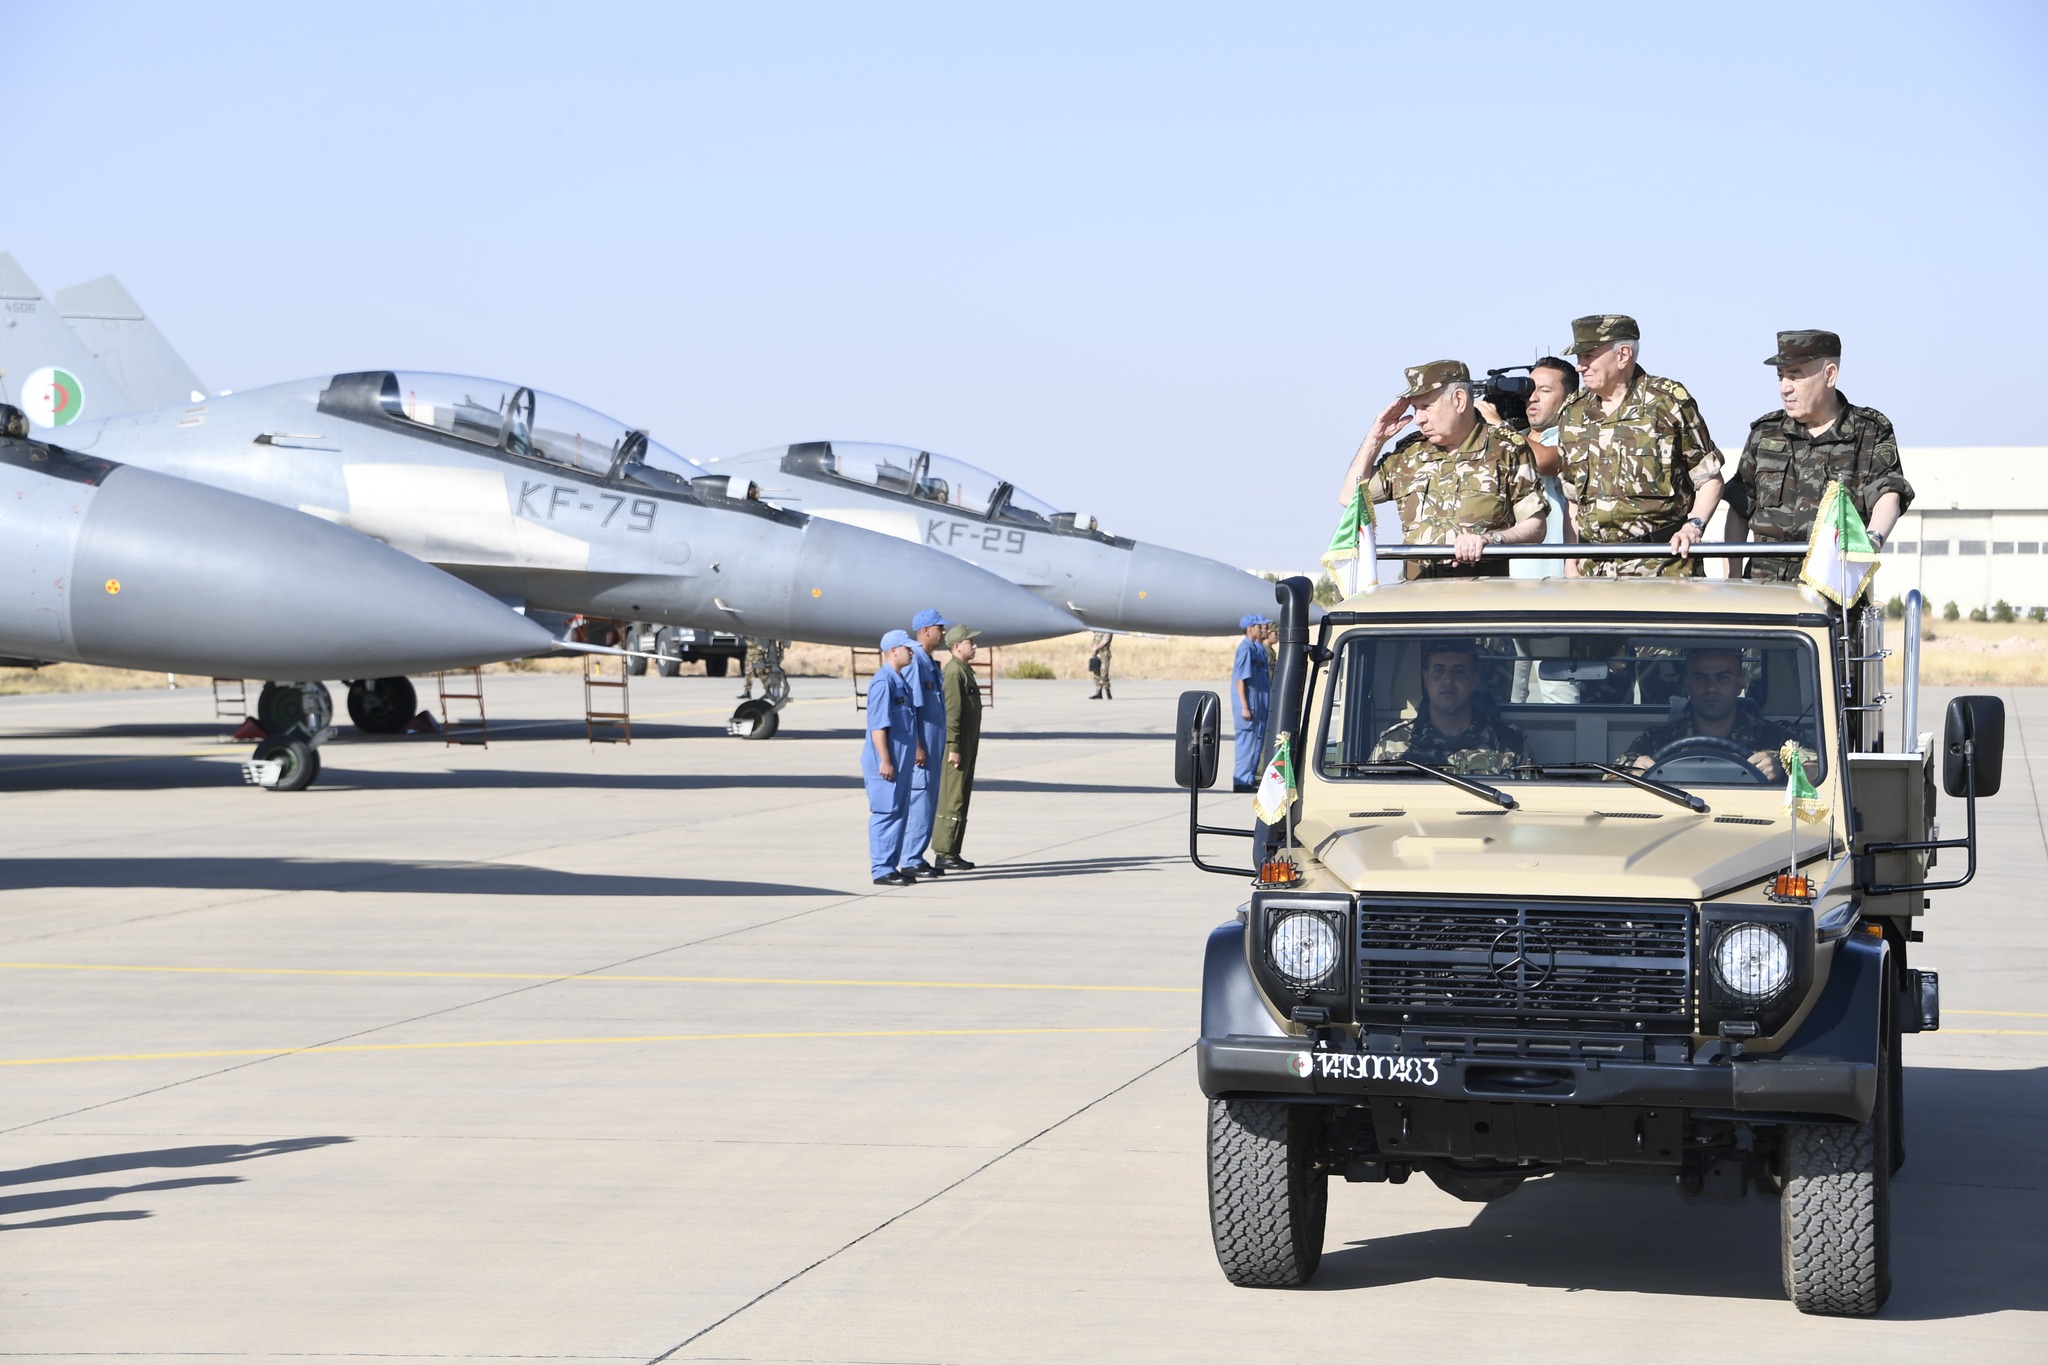 Chanegriha is making an important visit to the air base in Oum El-Bouaghi